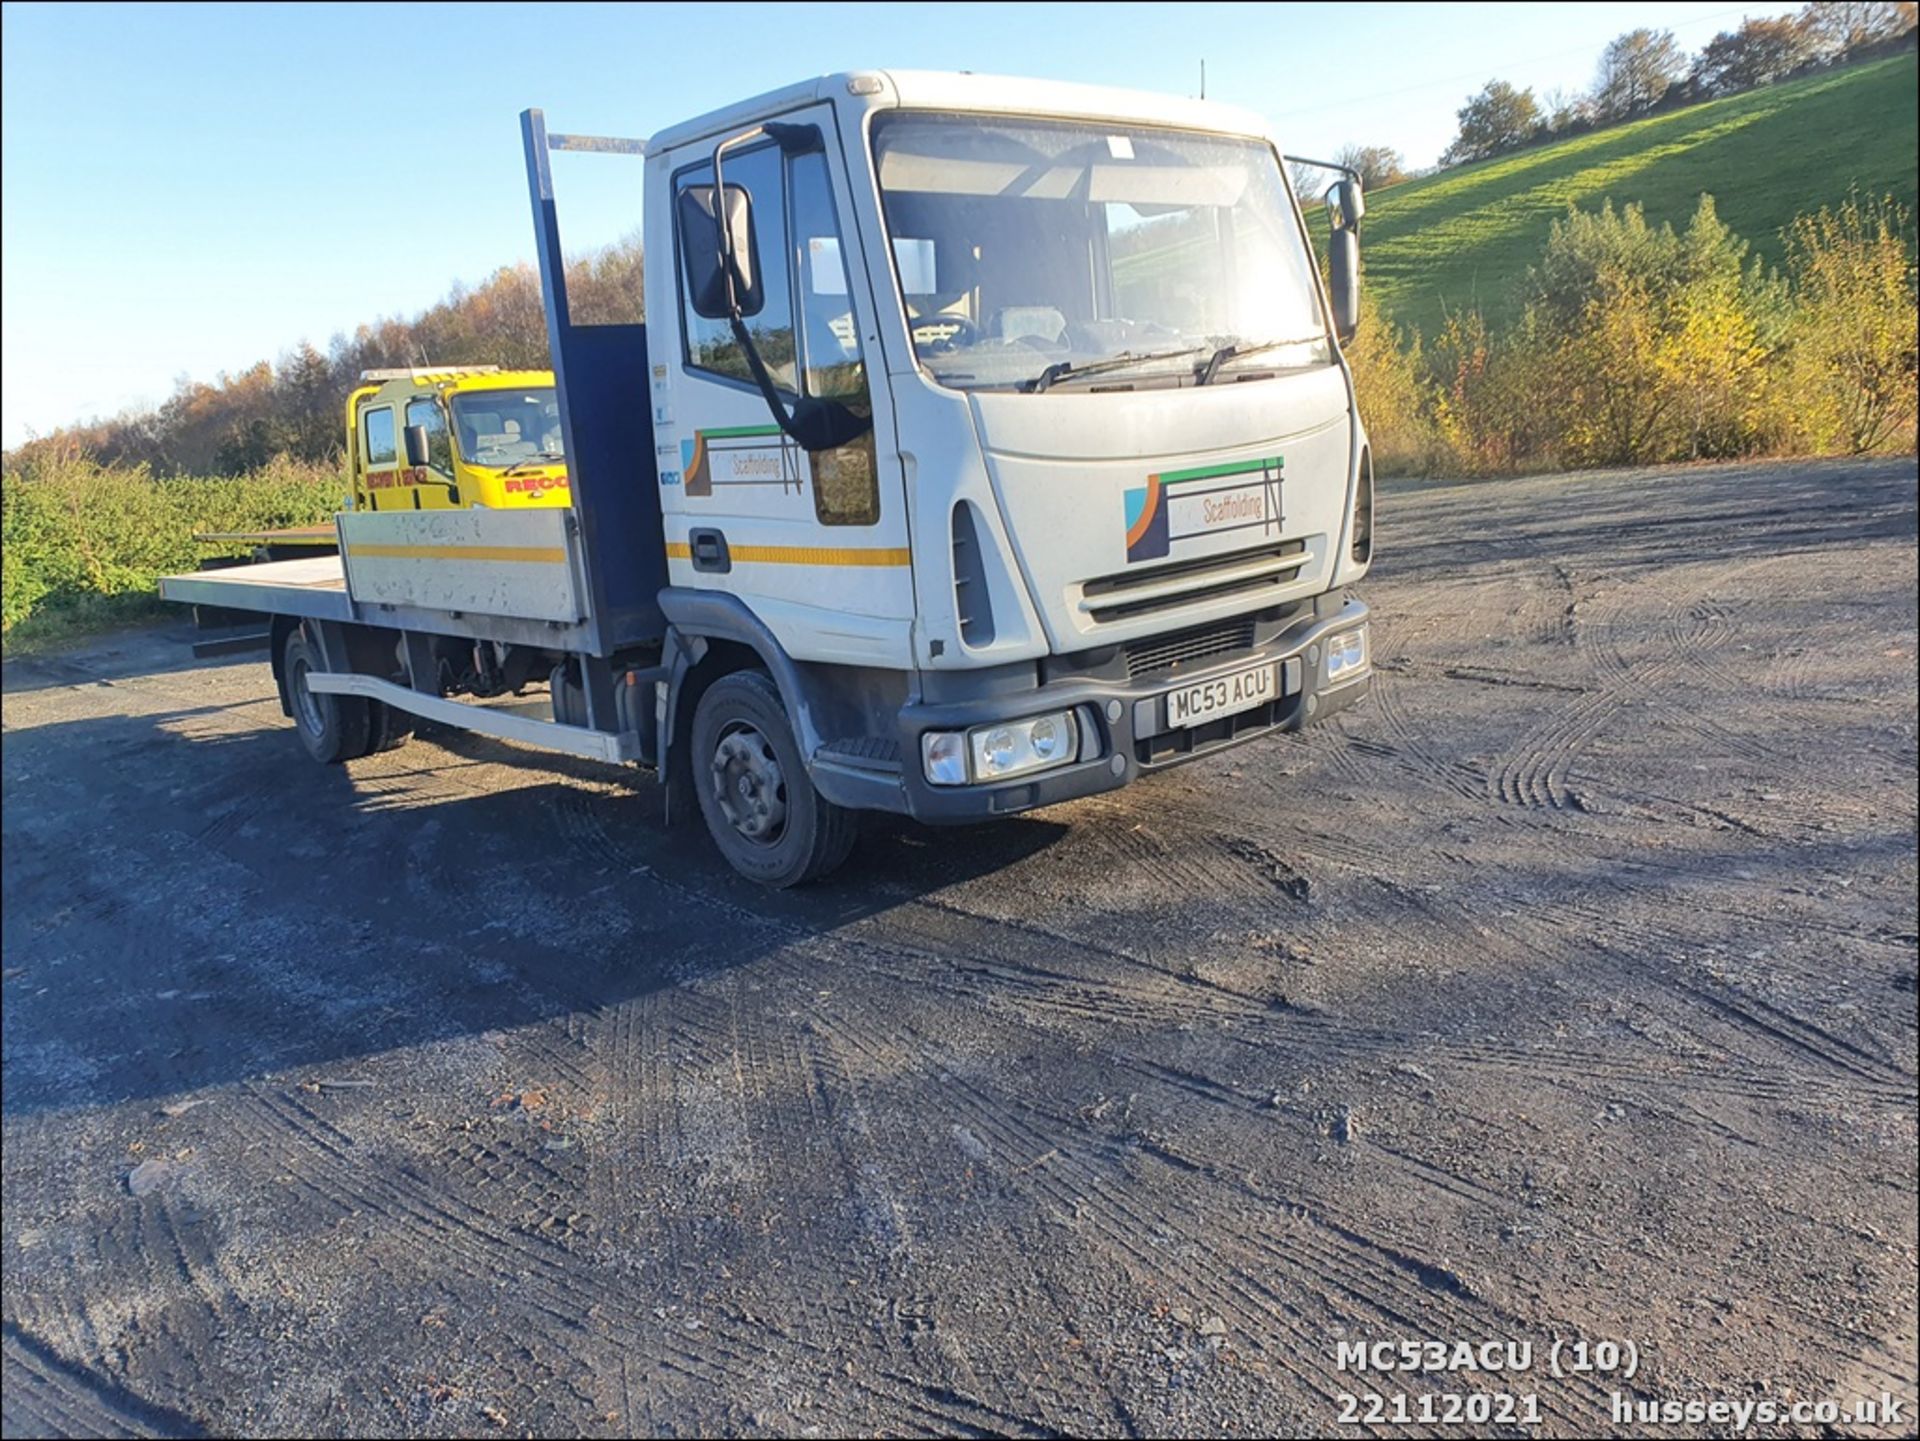 04/53 IVECO-FORD - 3920cc 2dr Flat Bed (White, 178k) - Image 5 of 24